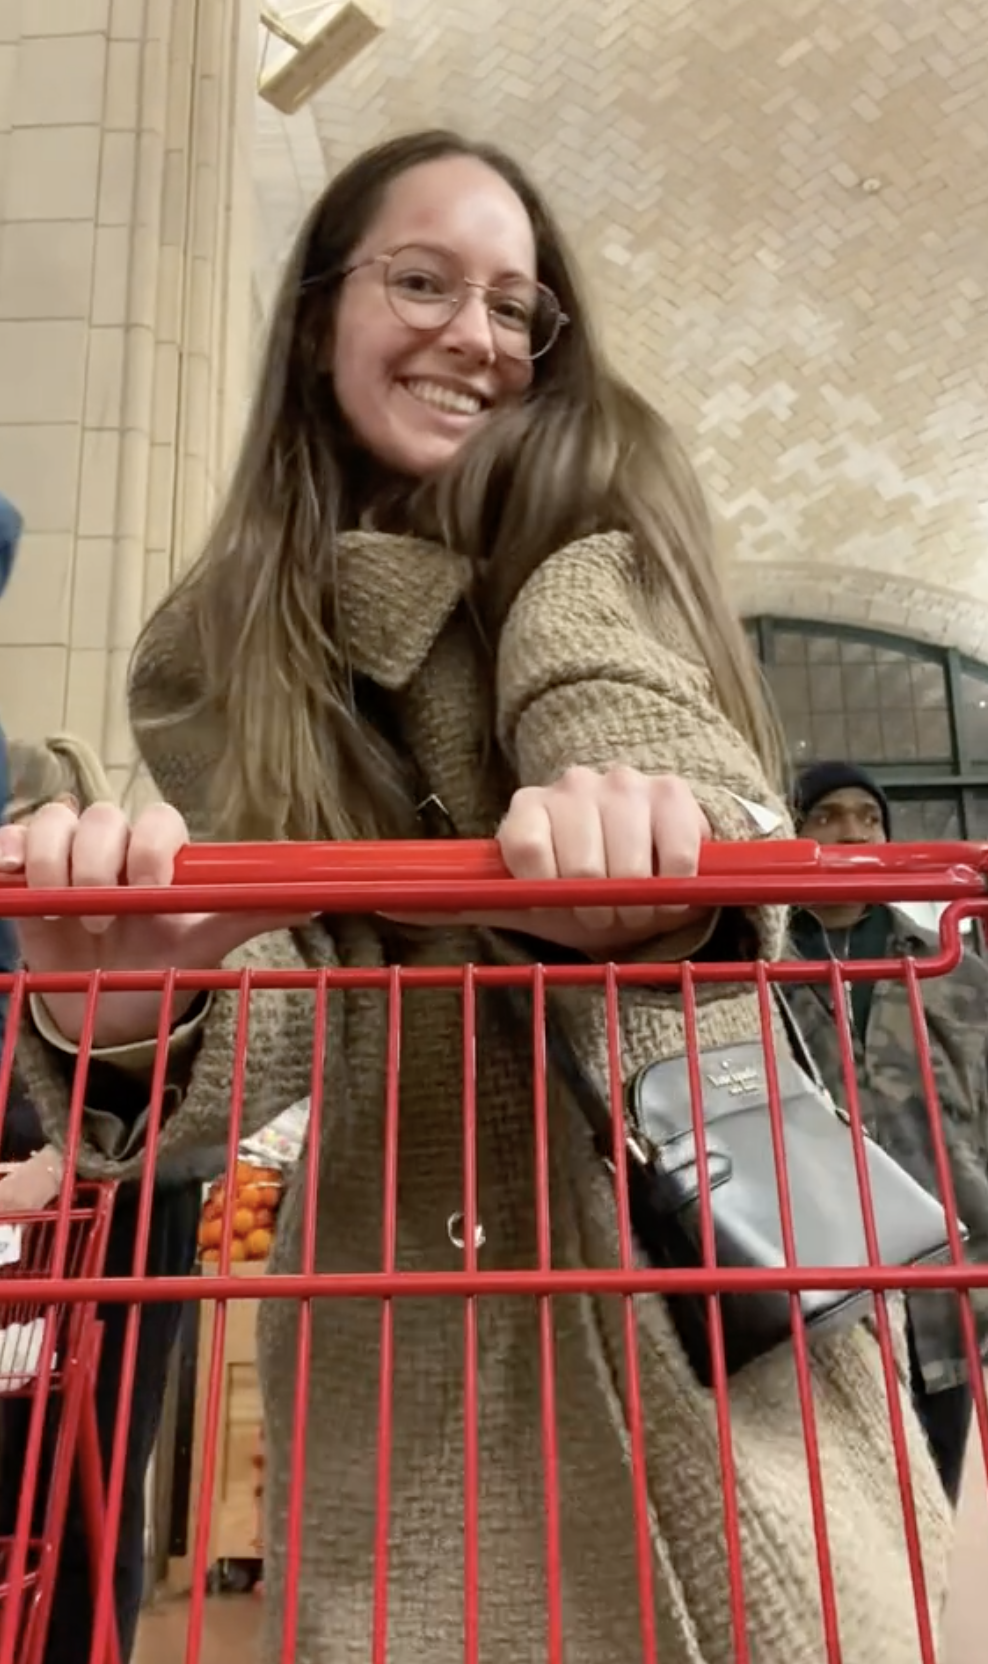 Maria pushing a shopping cart in a grocery store and smiling